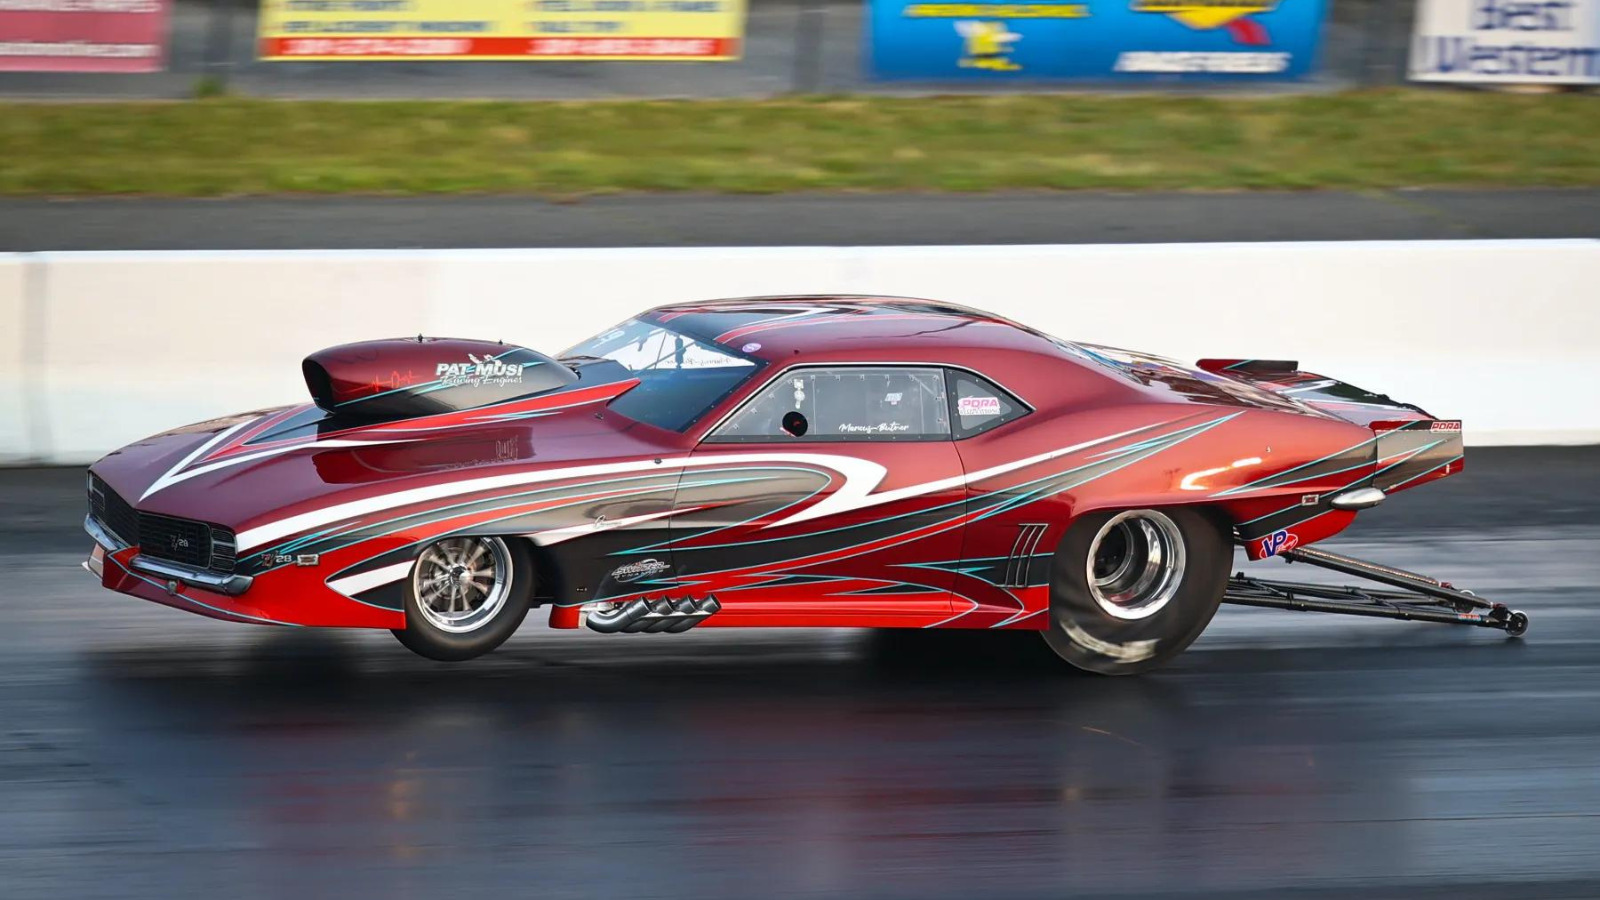 Marcus Butner Takes Out Jim Halsey in Pro Nitrous Final at PDRA North vs South Shootout – Drag Illustrated